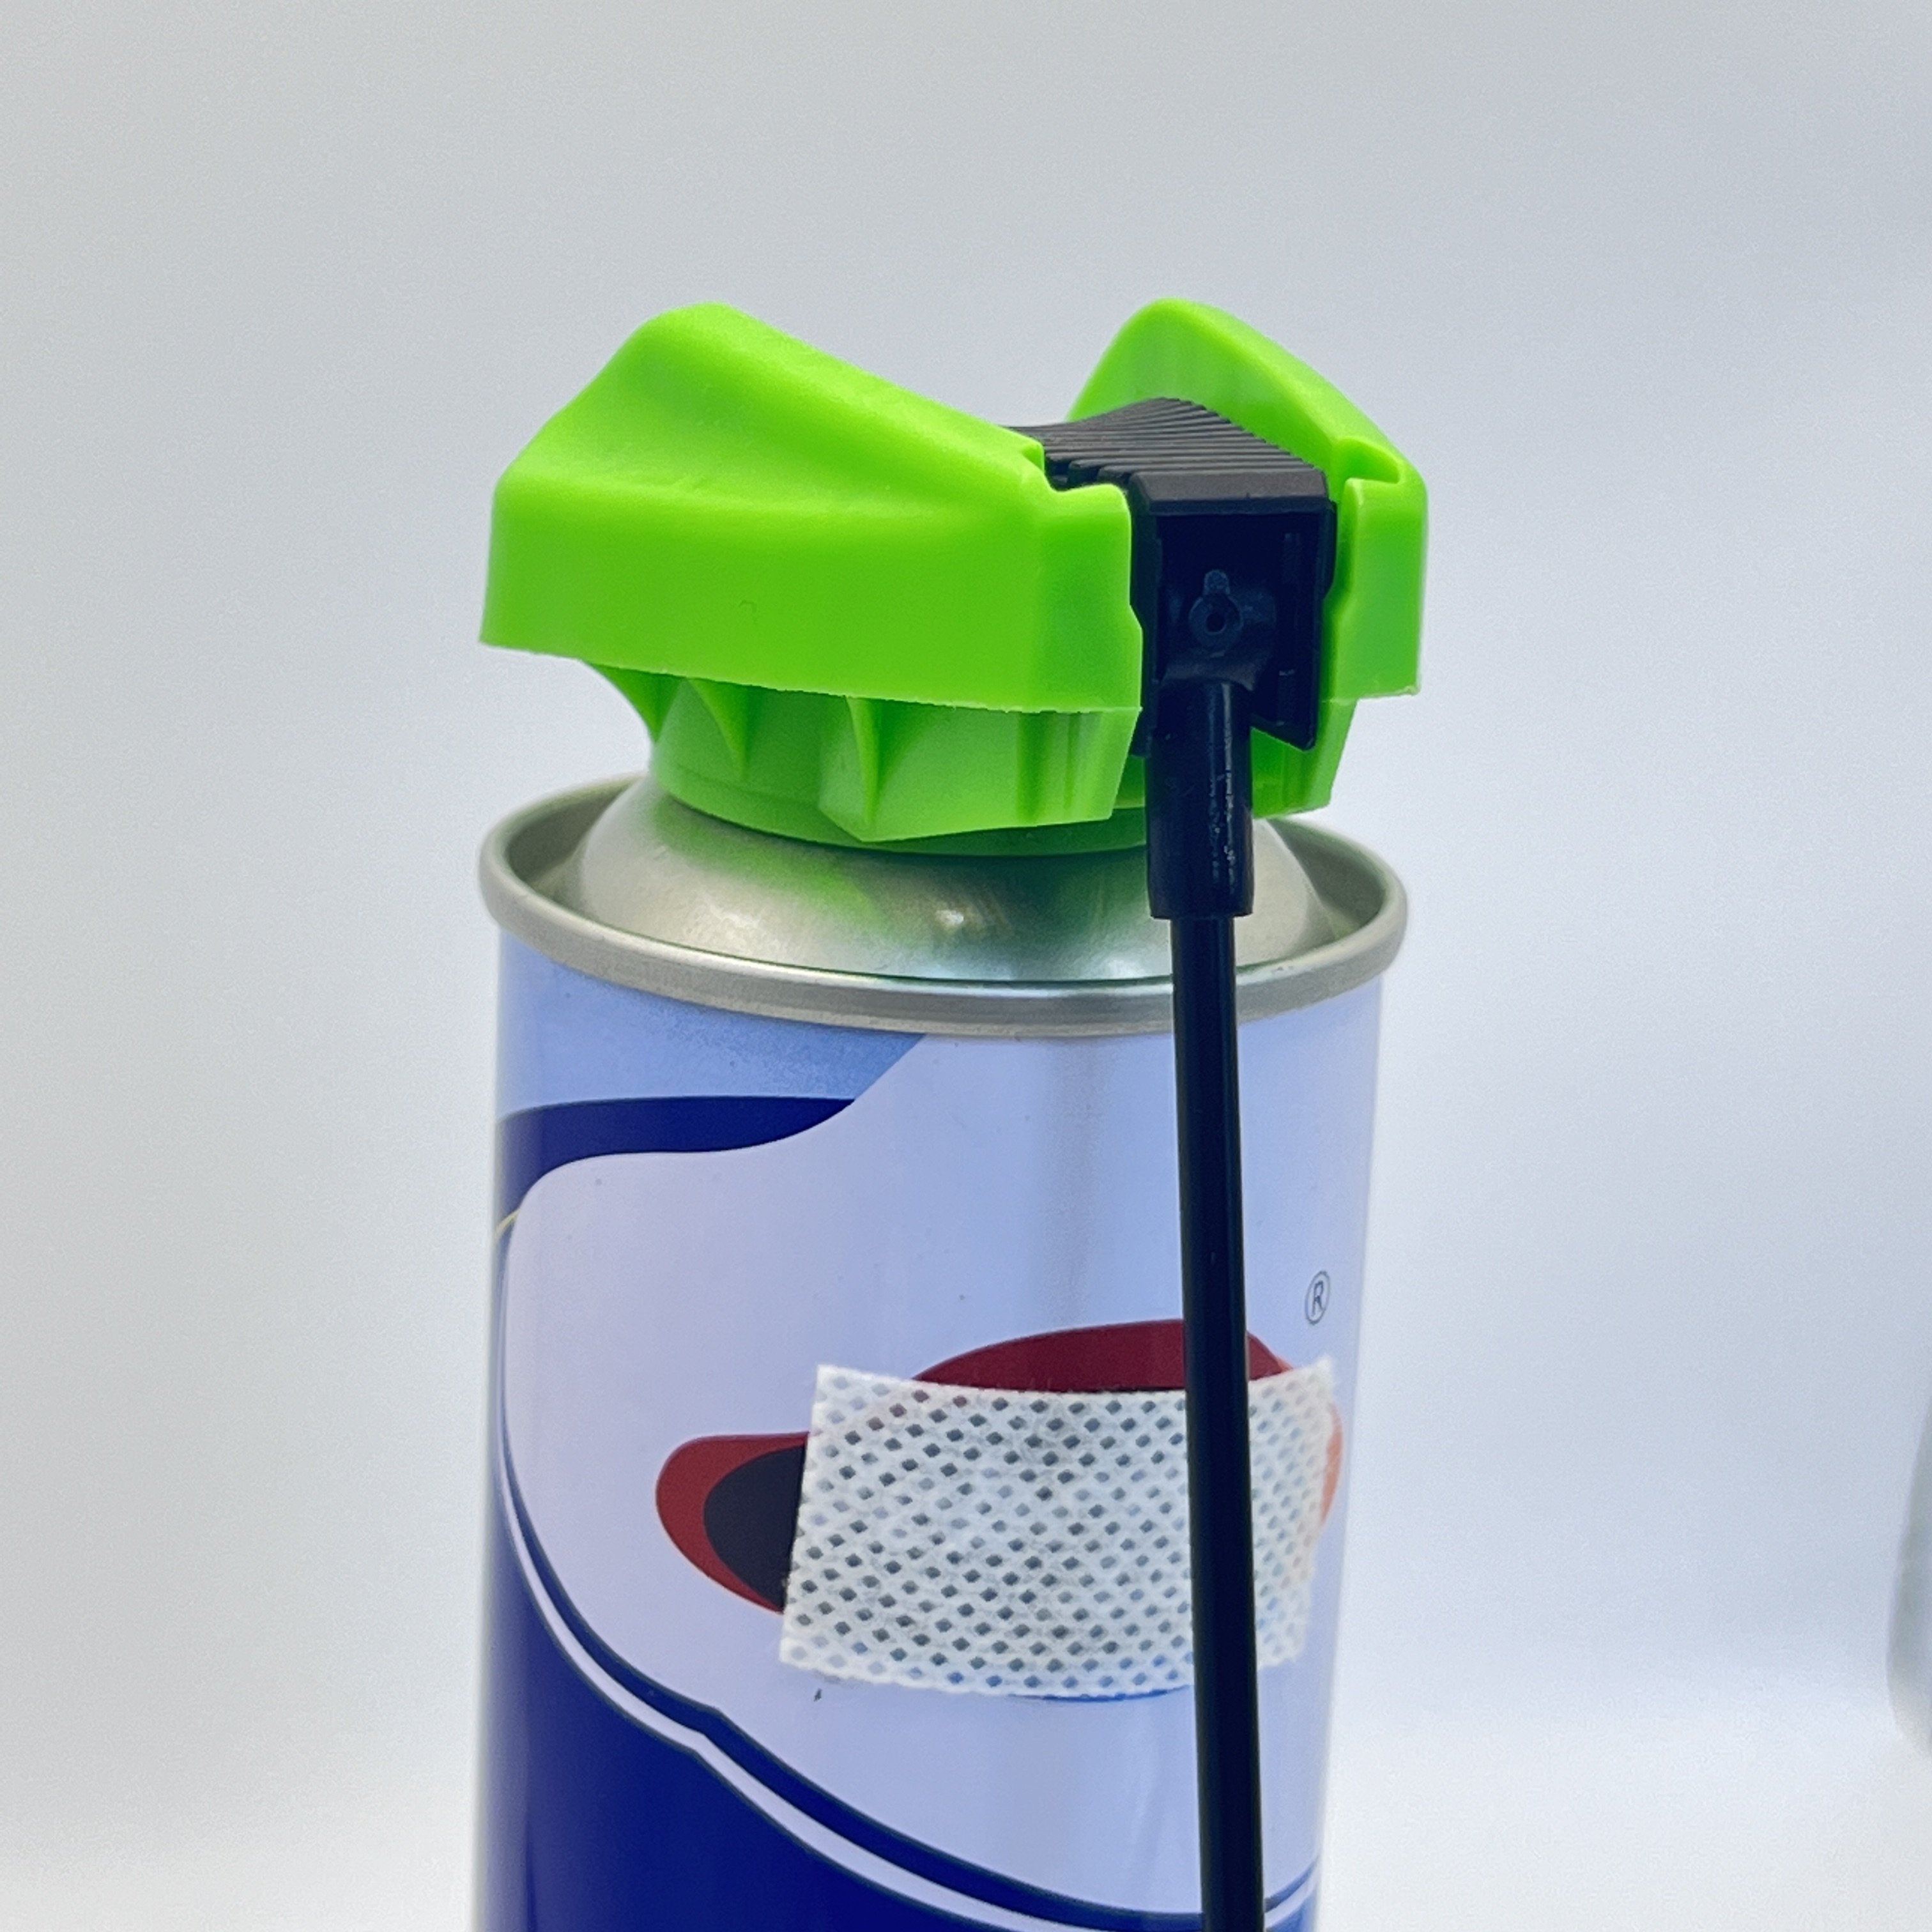 Portable Foldable Sprayer for Outdoor Adventures - On-the-Go Water Supply and Cleaning